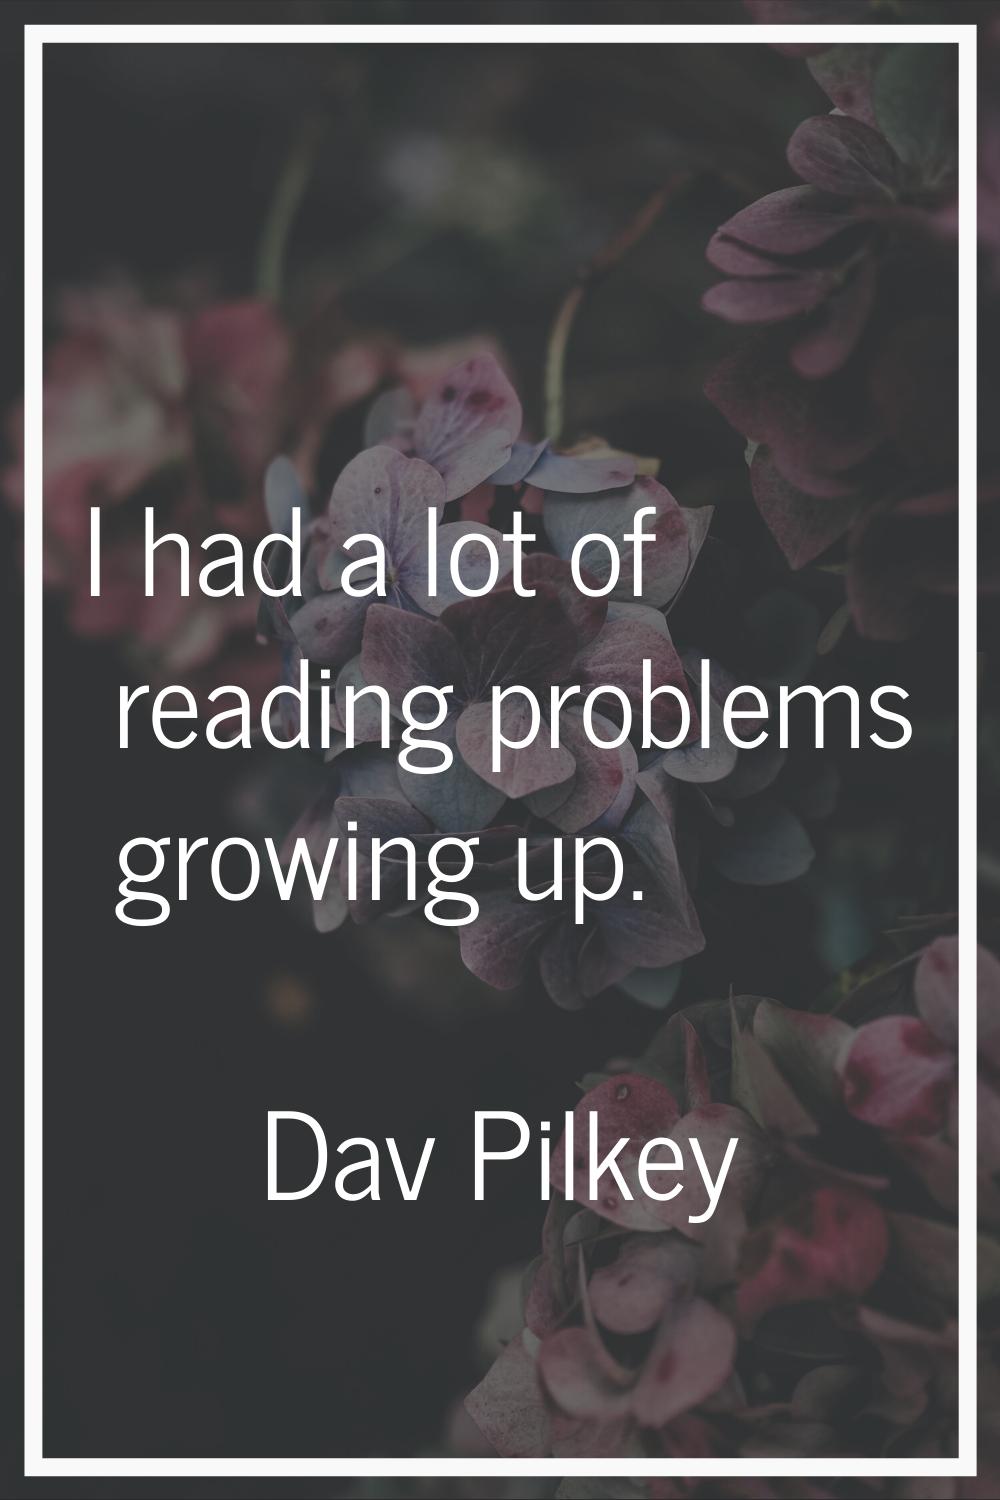 I had a lot of reading problems growing up.